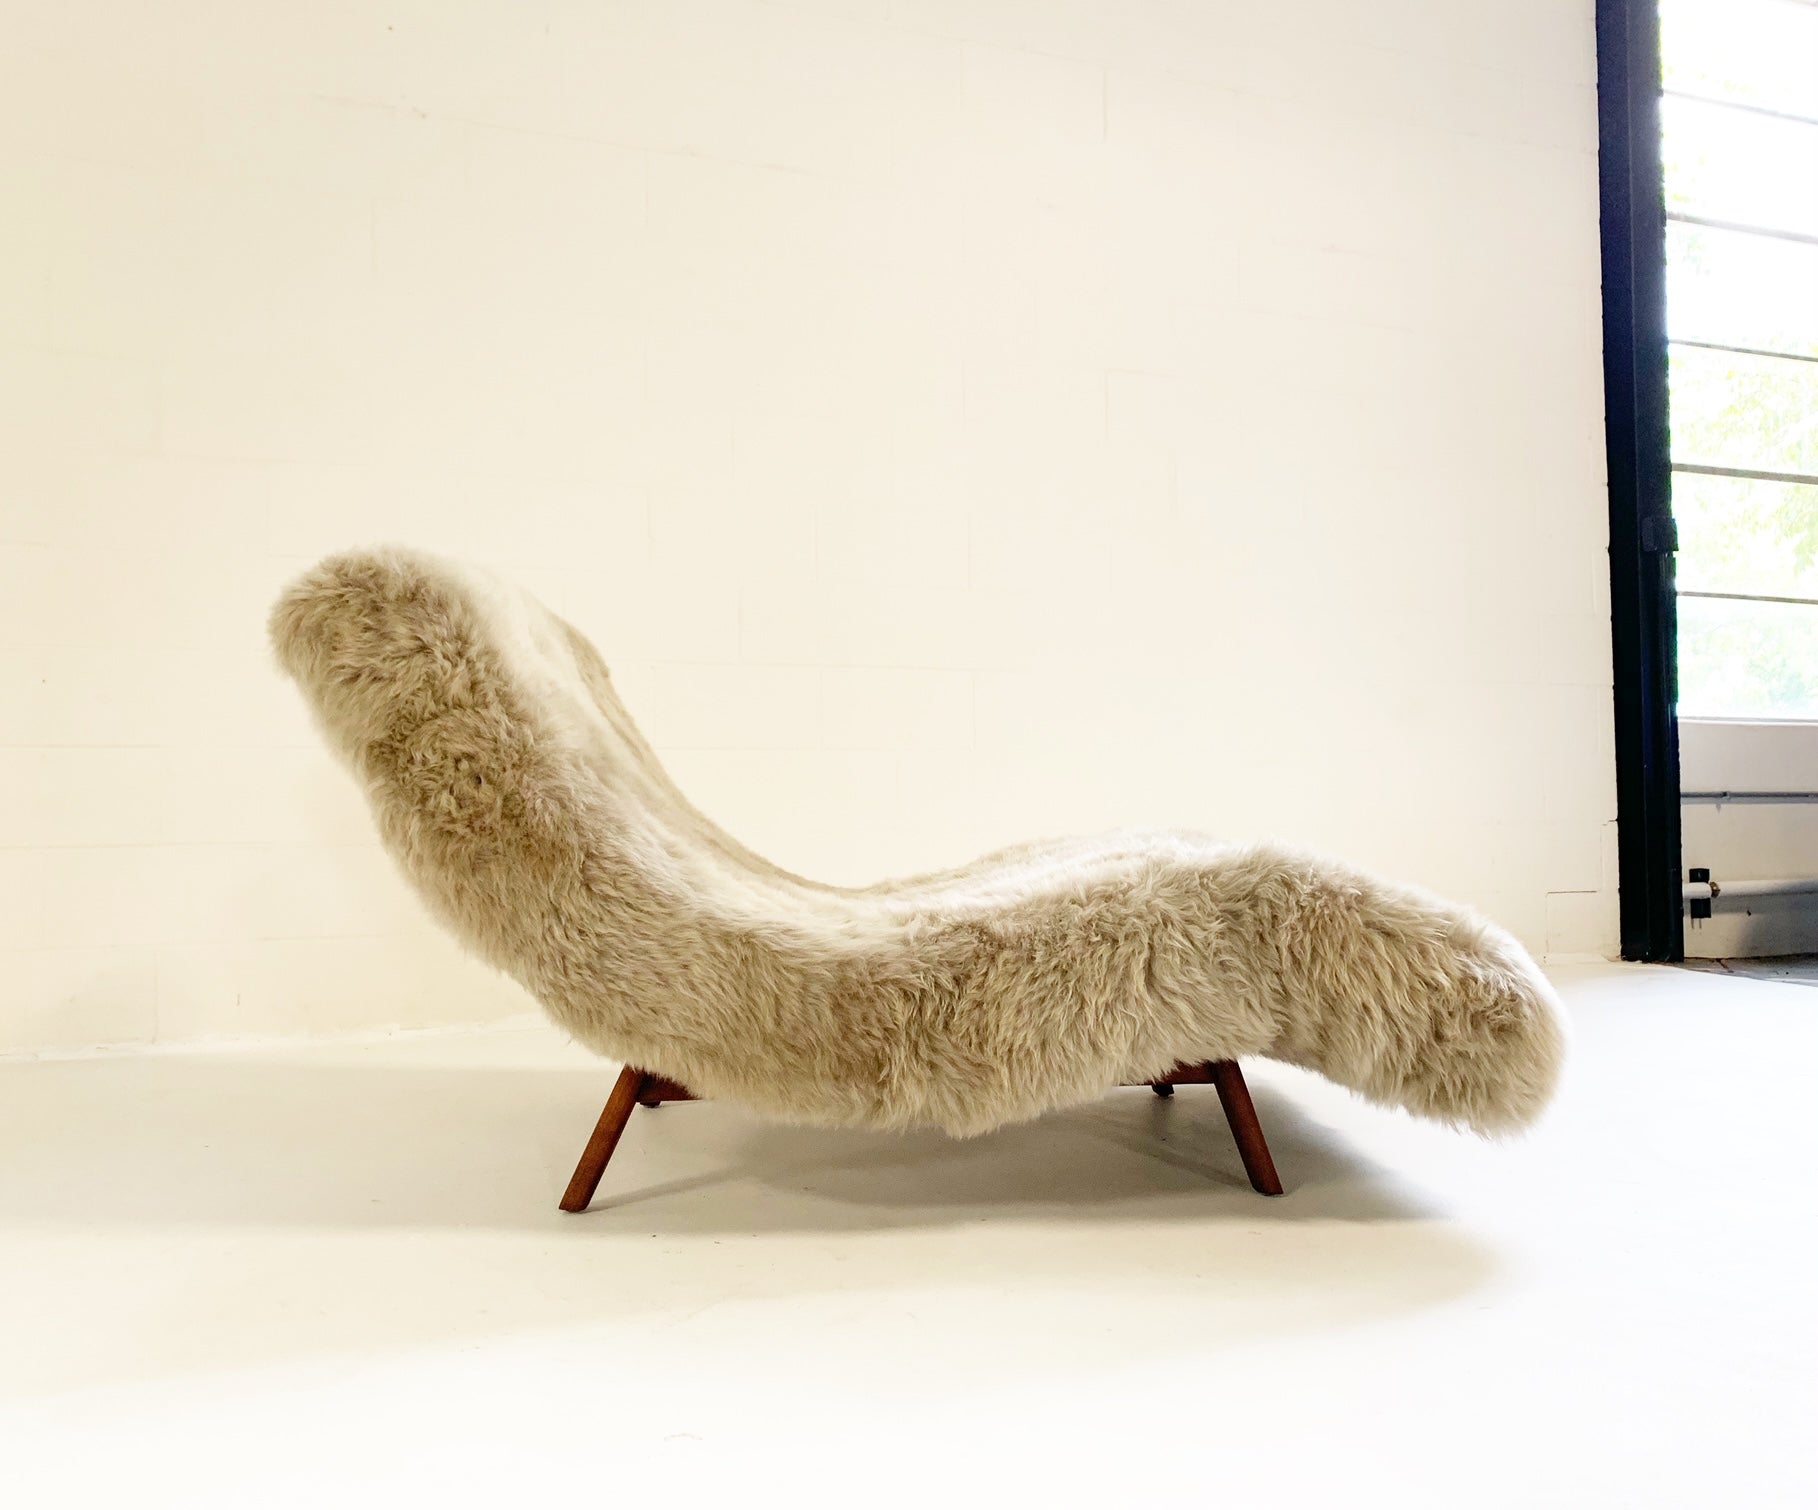 Wave Chaise Lounge in New Zealand Sheepskin - FORSYTH